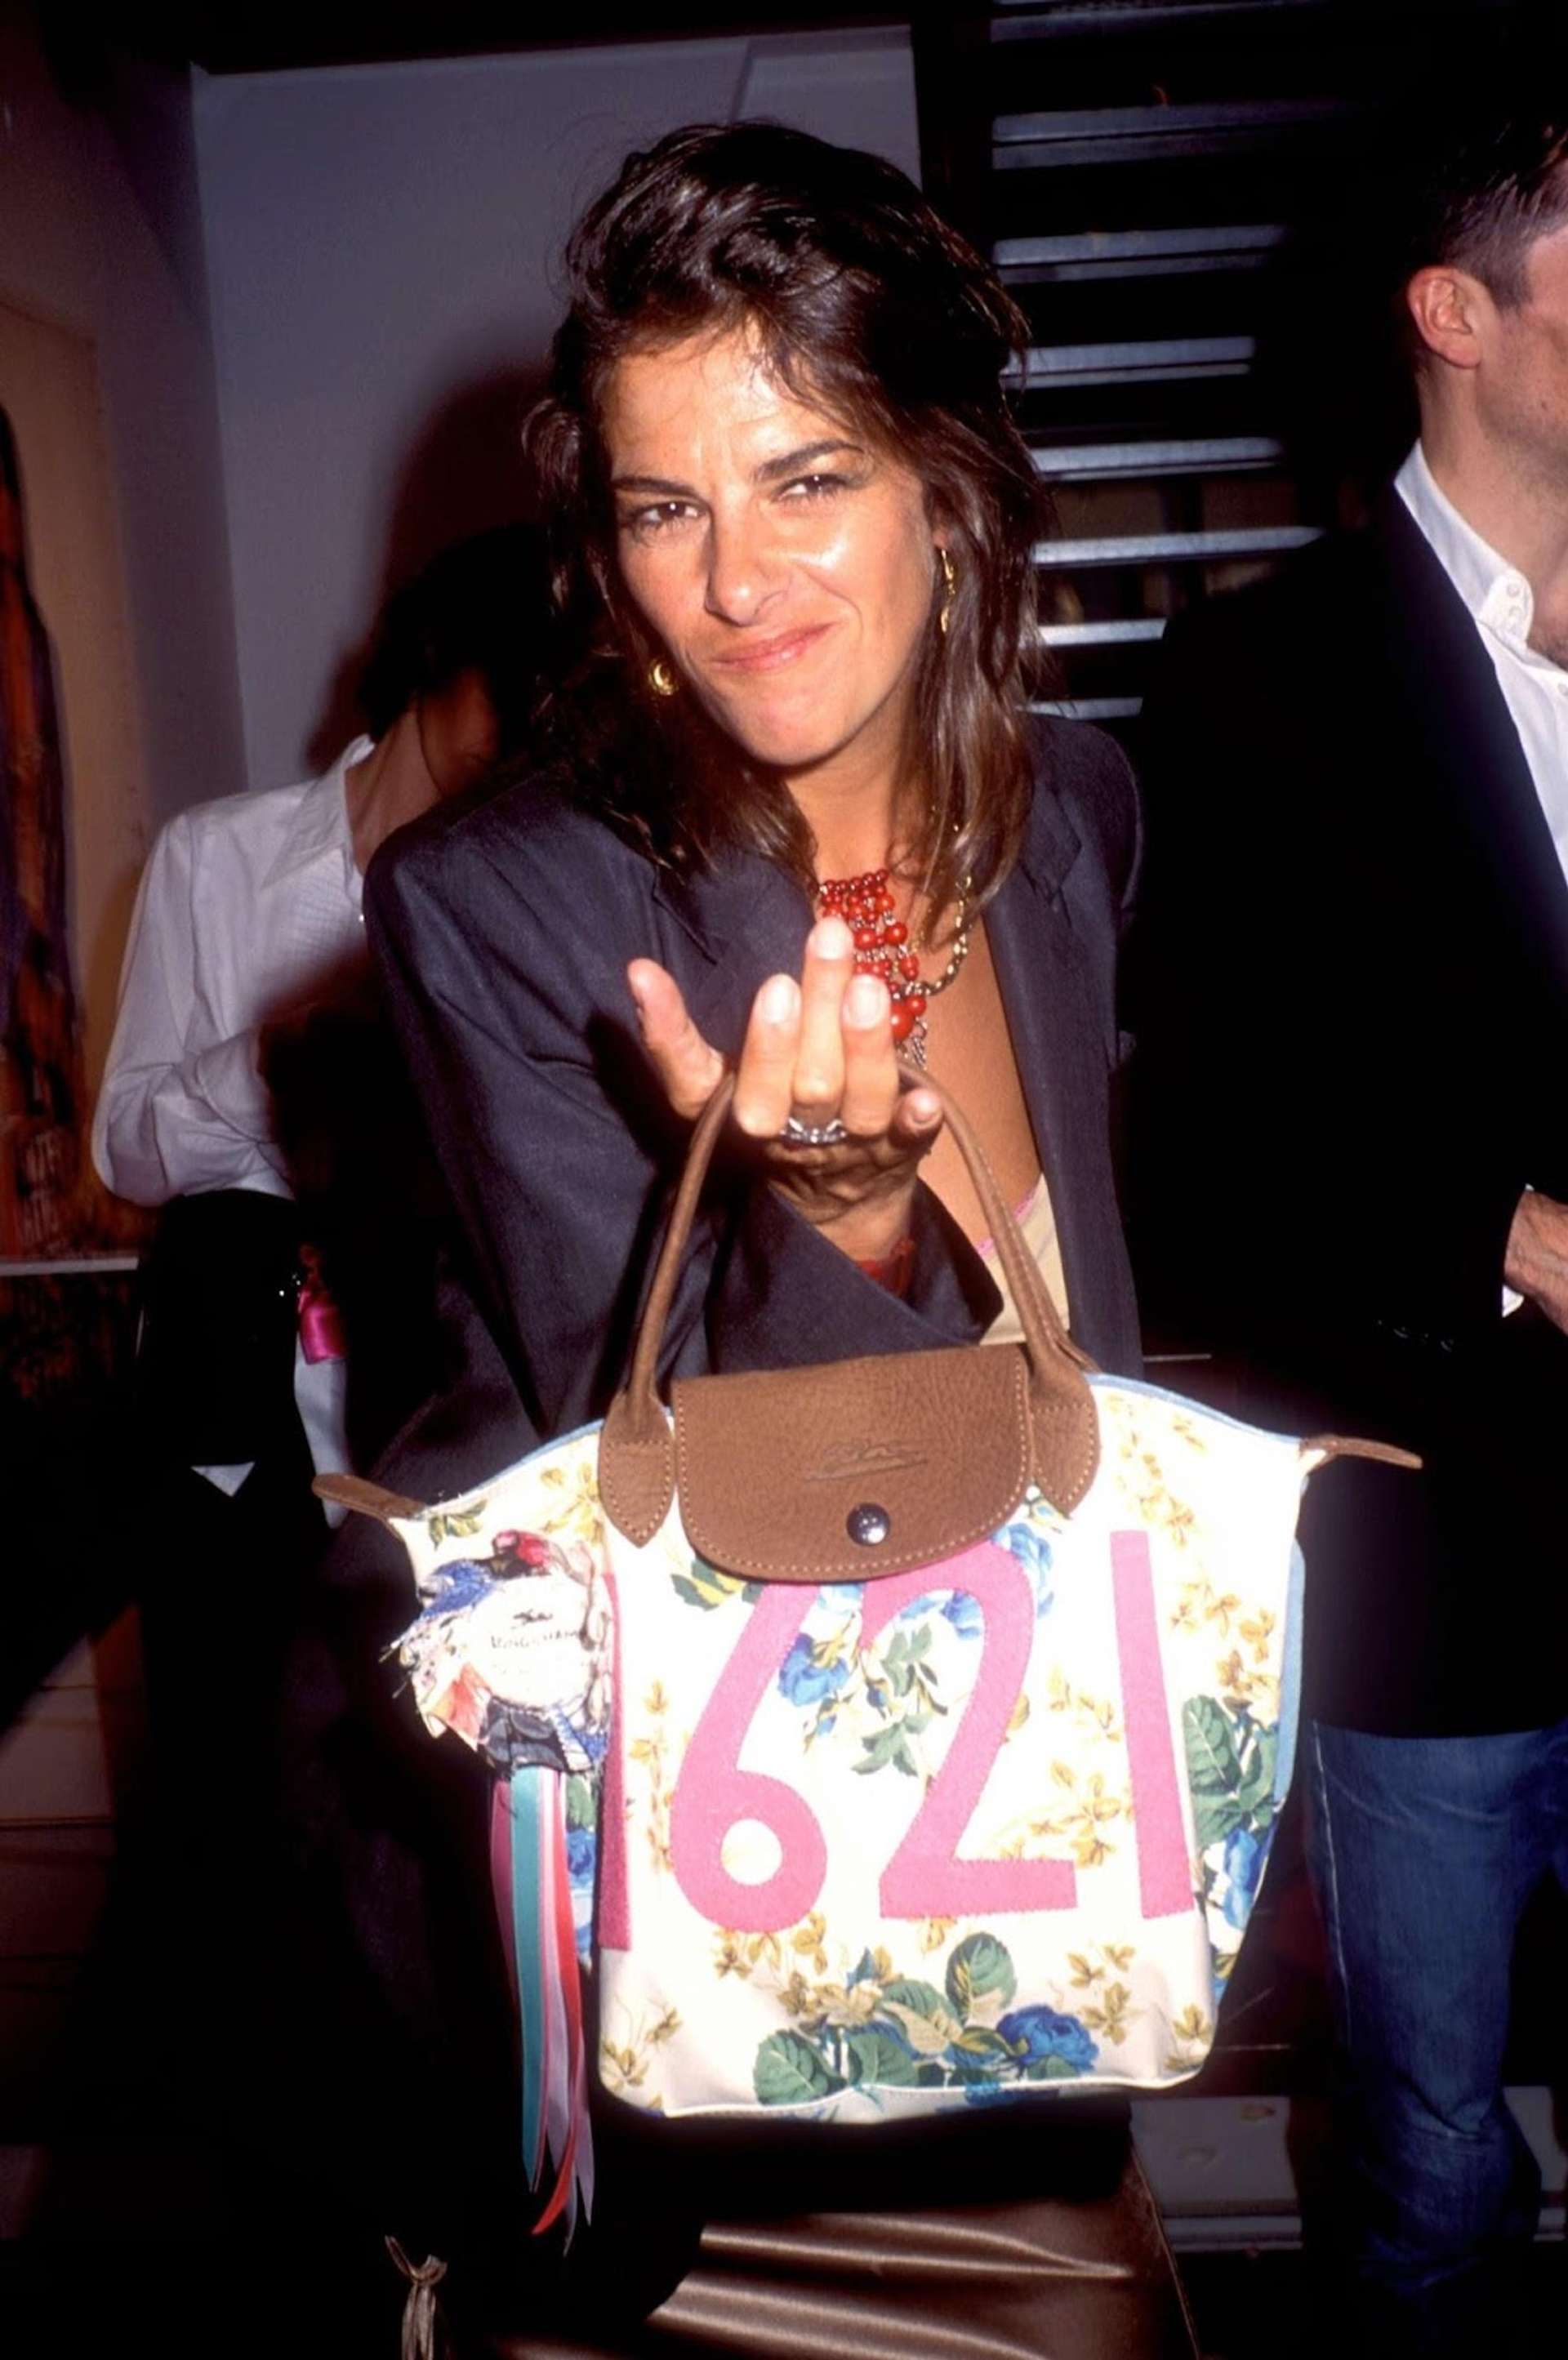 25 facts about the Longchamp Le Pliage bag that makes it so iconic